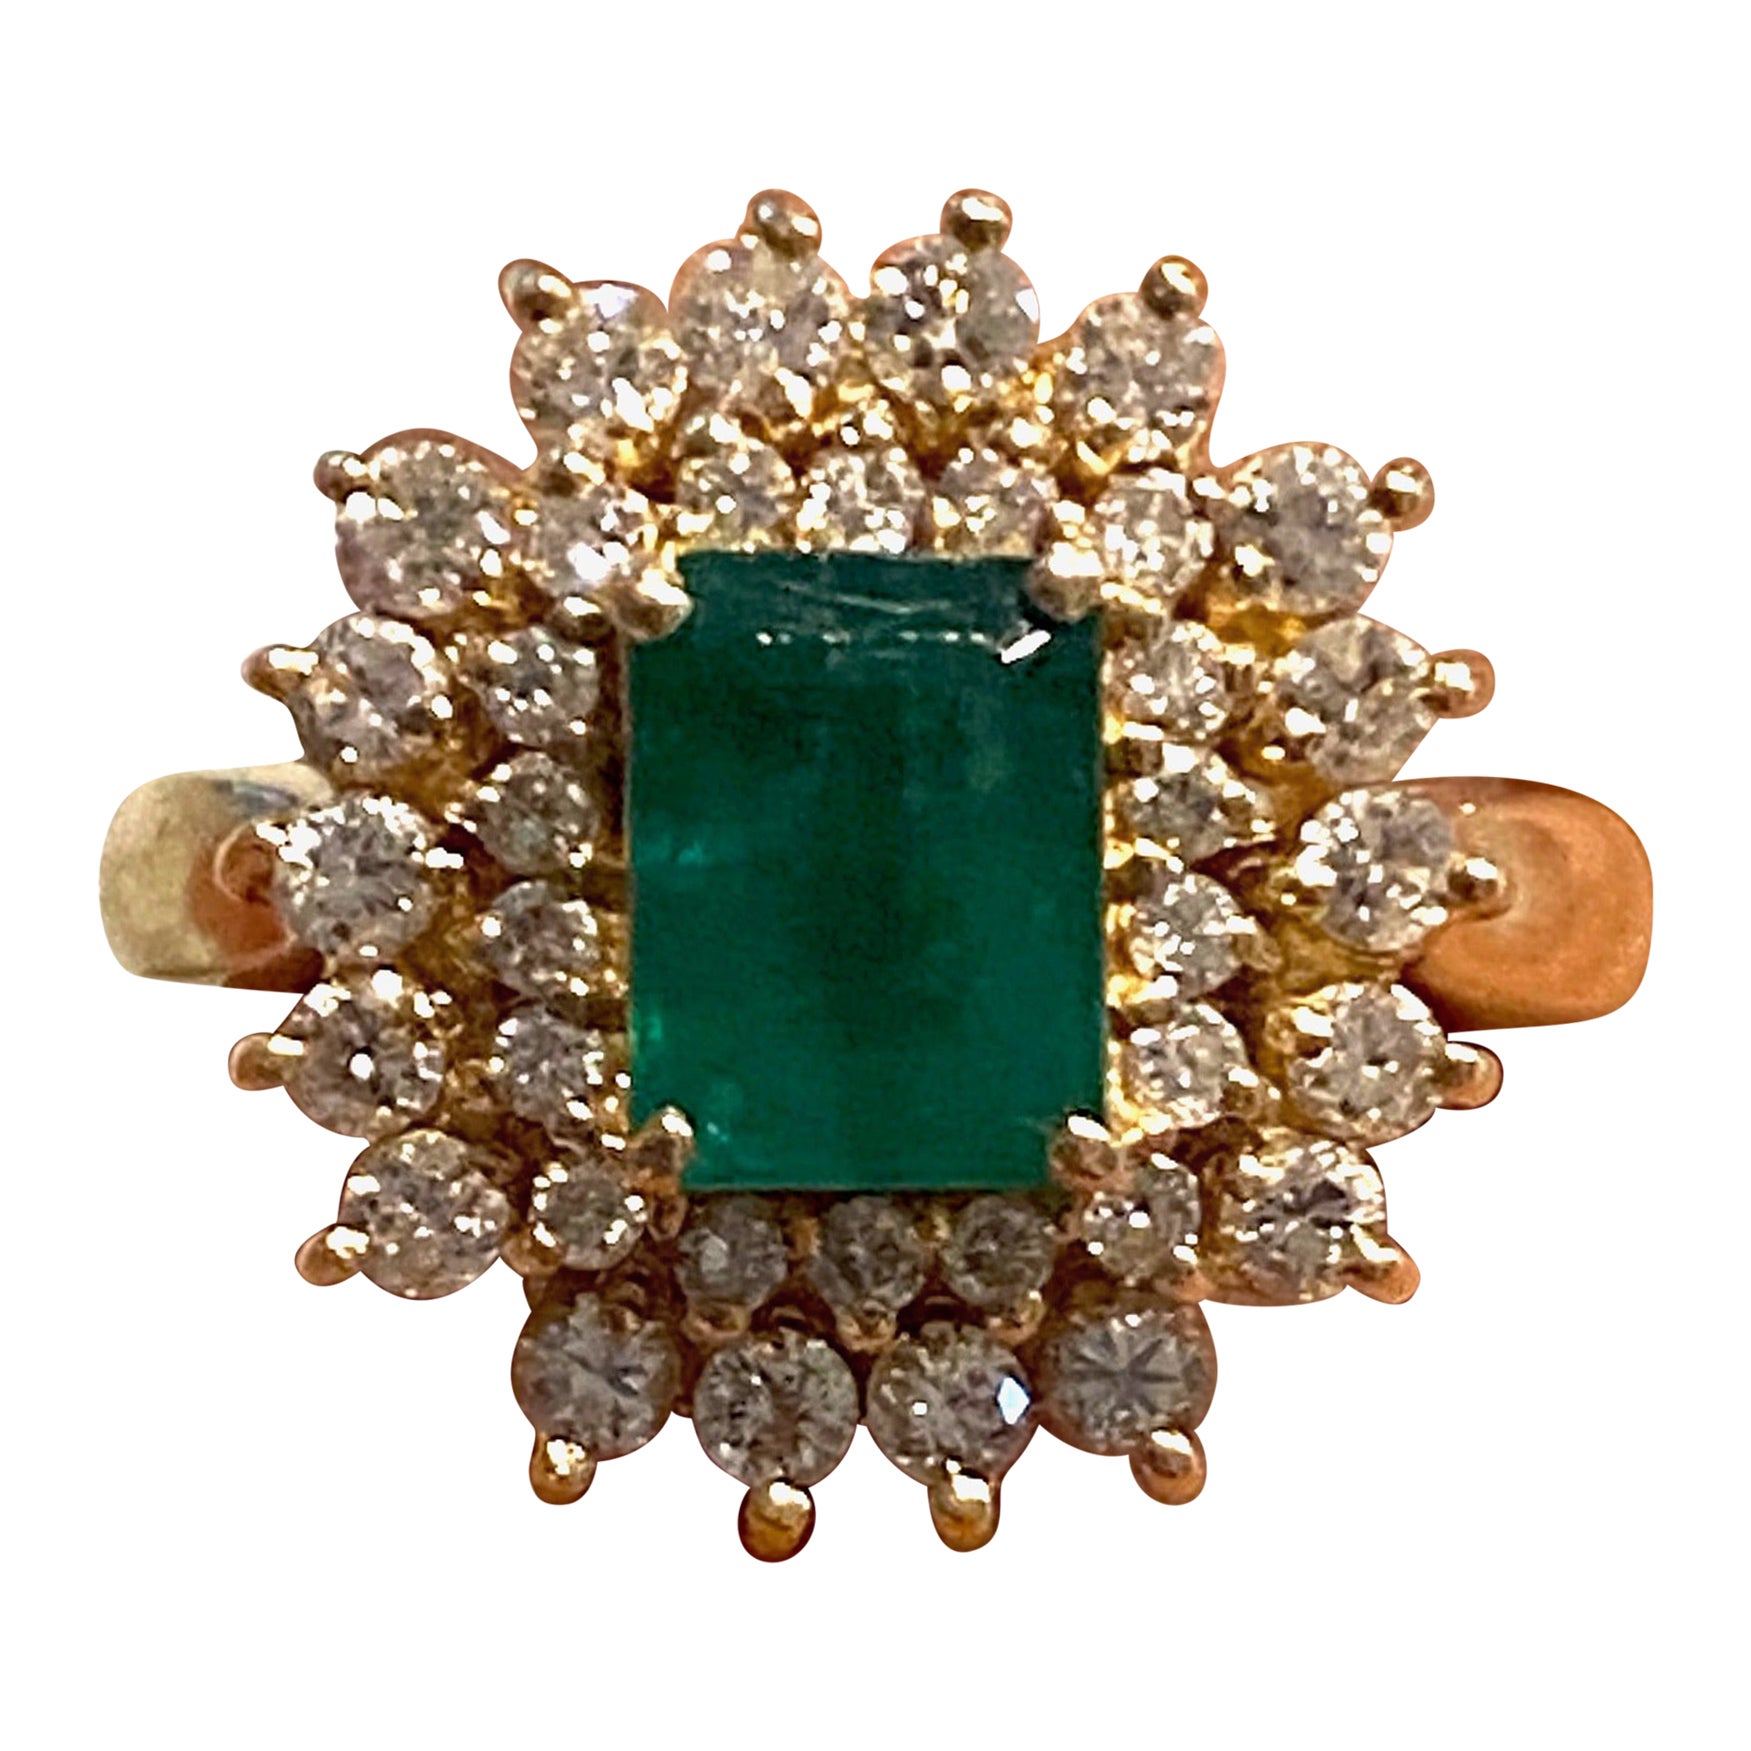 Colombian Emerald, 3 Carat total weight Diamond Ring
The ring features a center Emerald Cut Emerald of Colombian origin measuring 8 x 6 mm in diameter and weighing approximately 1.75 carats. The color green is consistent and beautiful and shows as